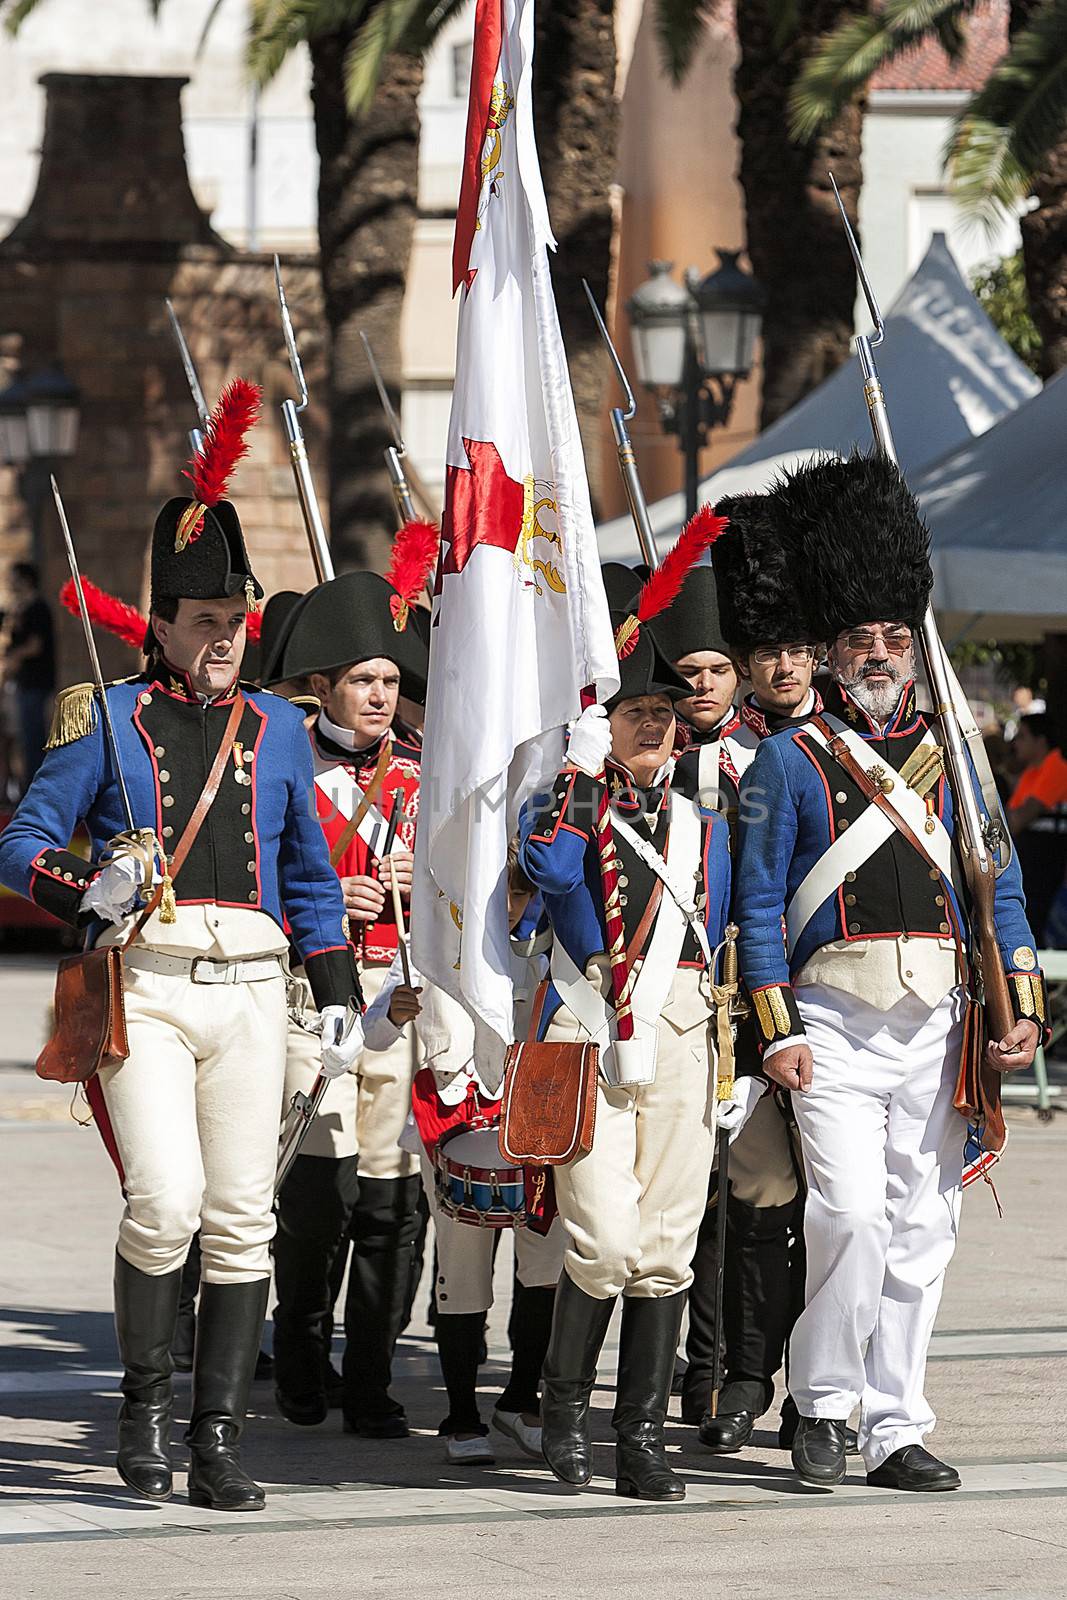 French troops marching in the Representation of the Battle of Bailen, Bailen  Jaen province, Andalusia, Spain